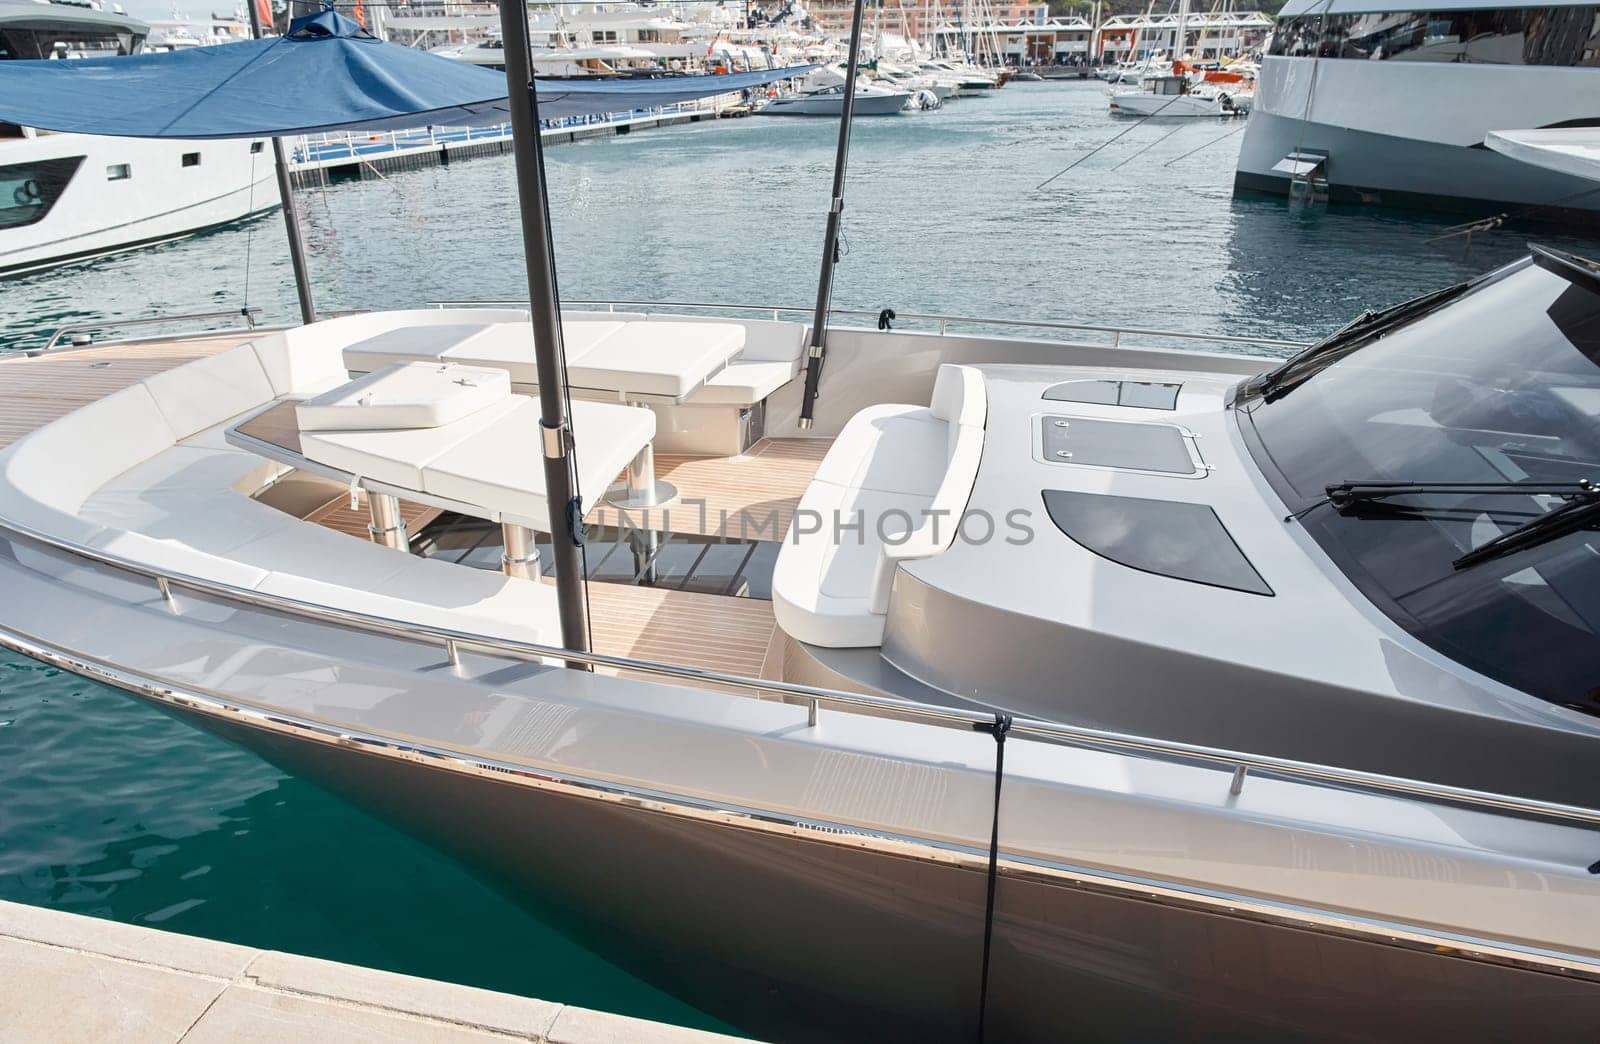 Close-up view of a relaxation area on the open teak deck of an expensive motorboat at sunny day, Monaco yacht show, large boat exhibition, wealth life, table and chairs. High quality photo